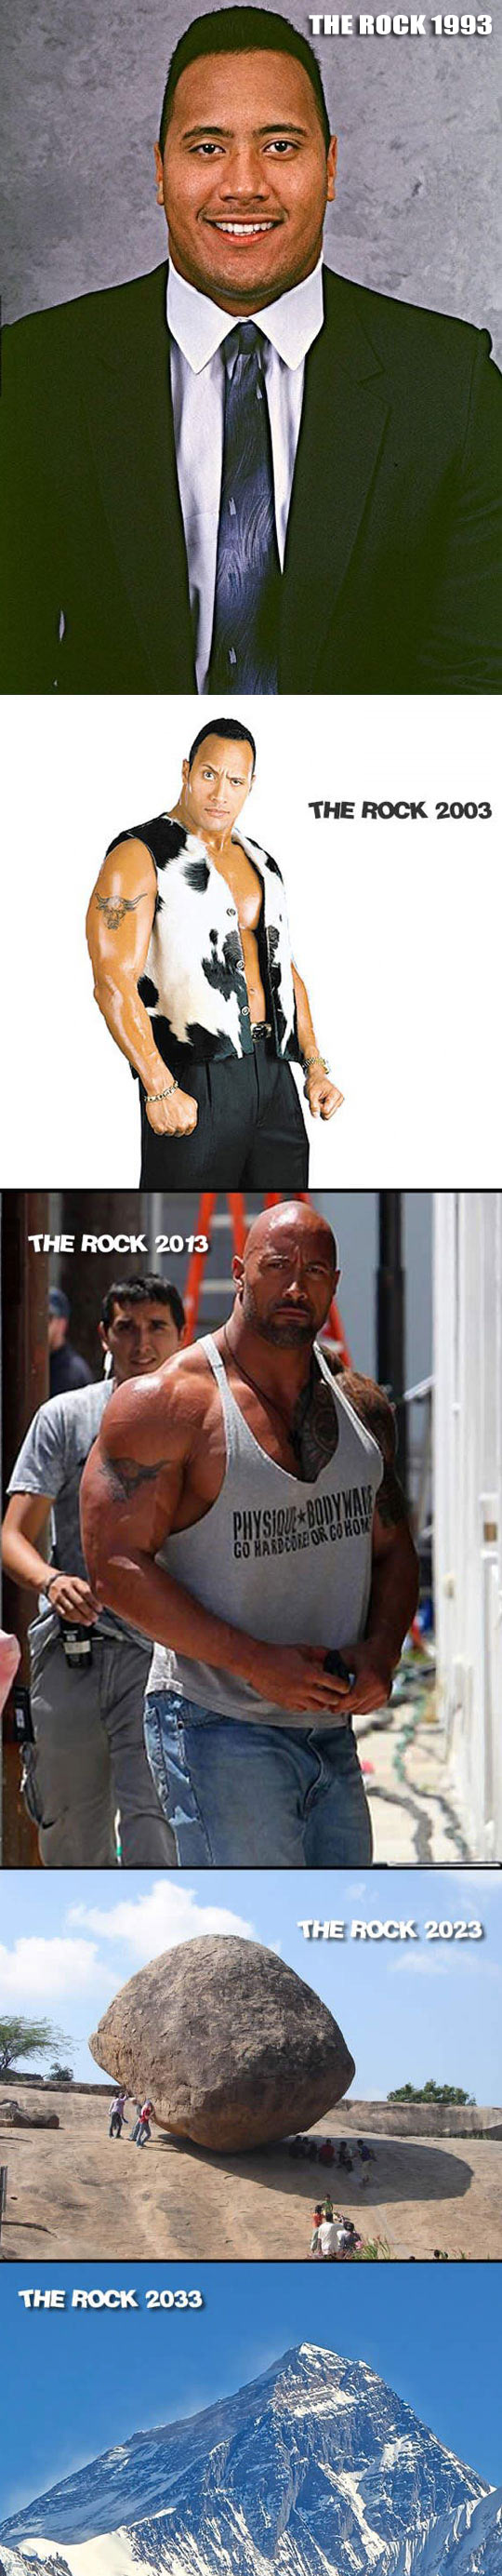 The Rock in time.